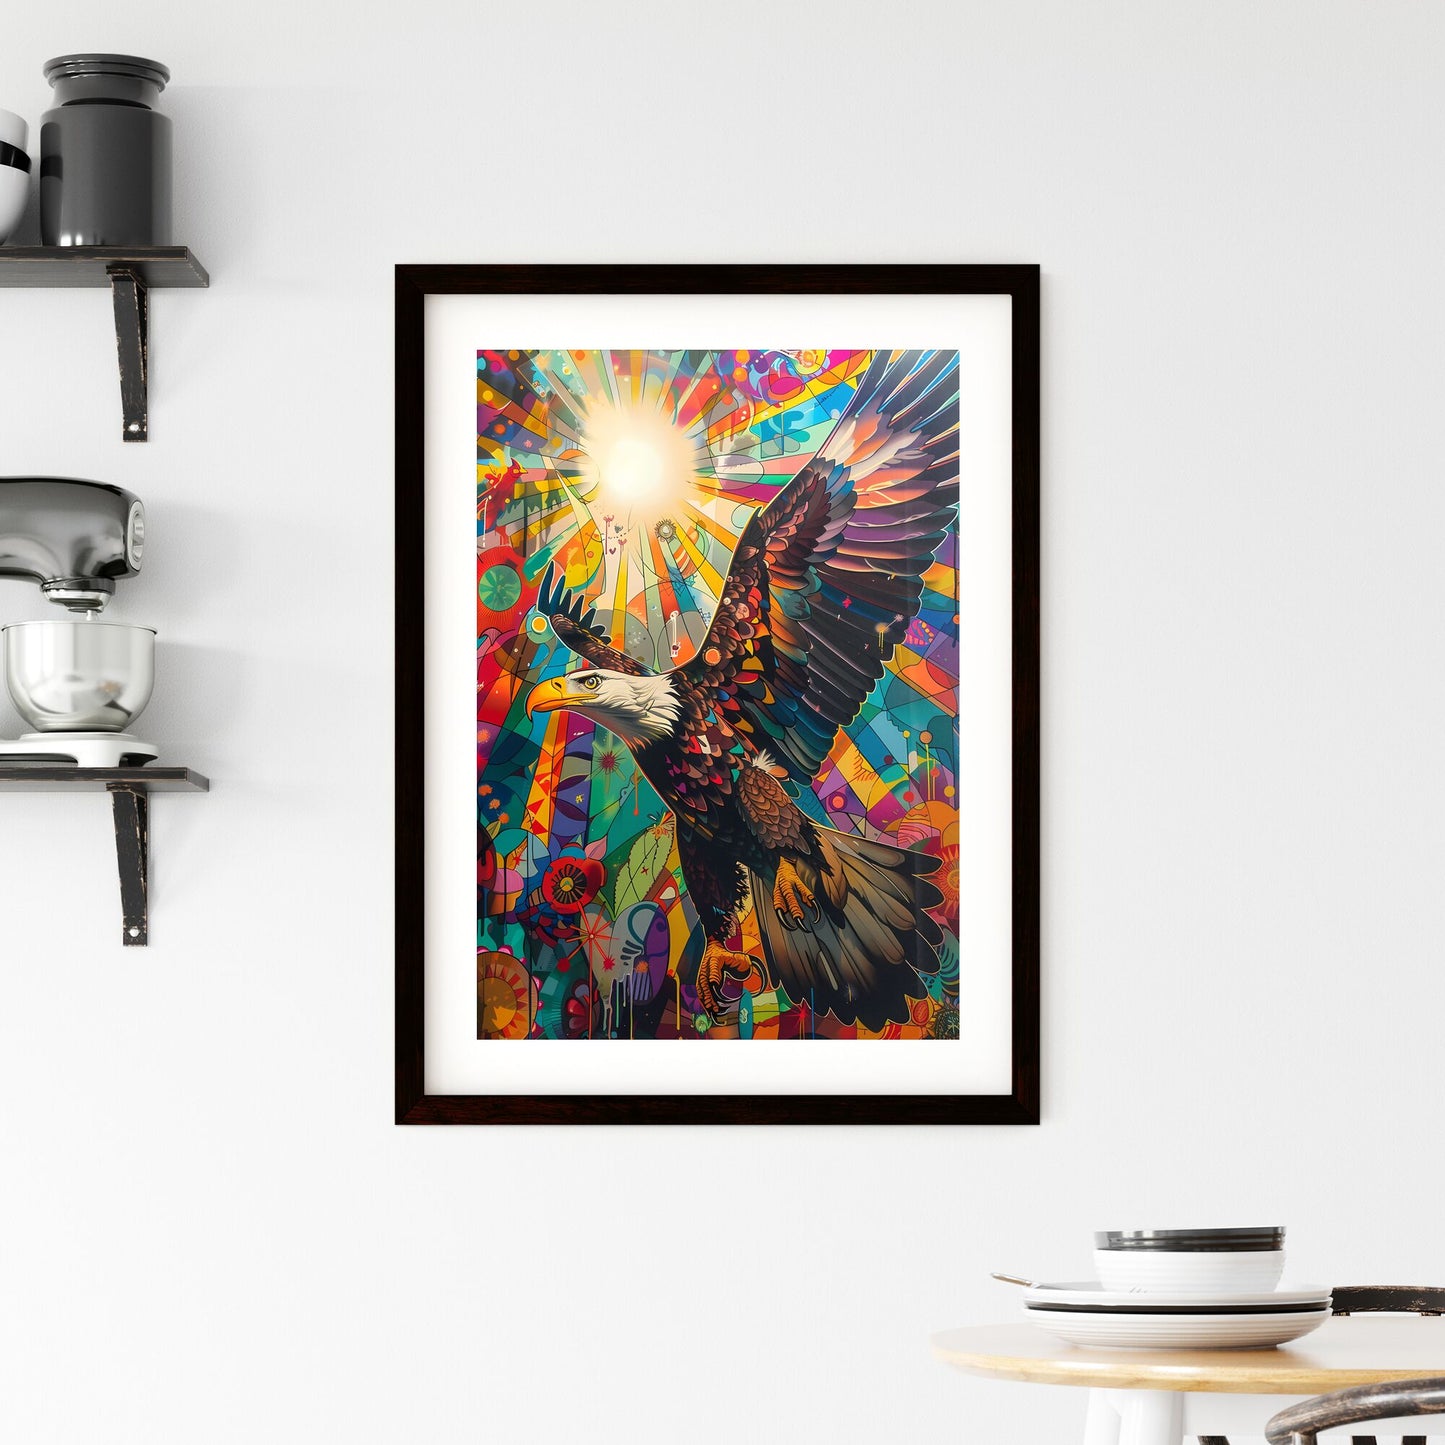 Psychedelic Eagle Painting: Vibrant Pop Art Deco Landscape with Sunlight and Stained Glass Elements Default Title